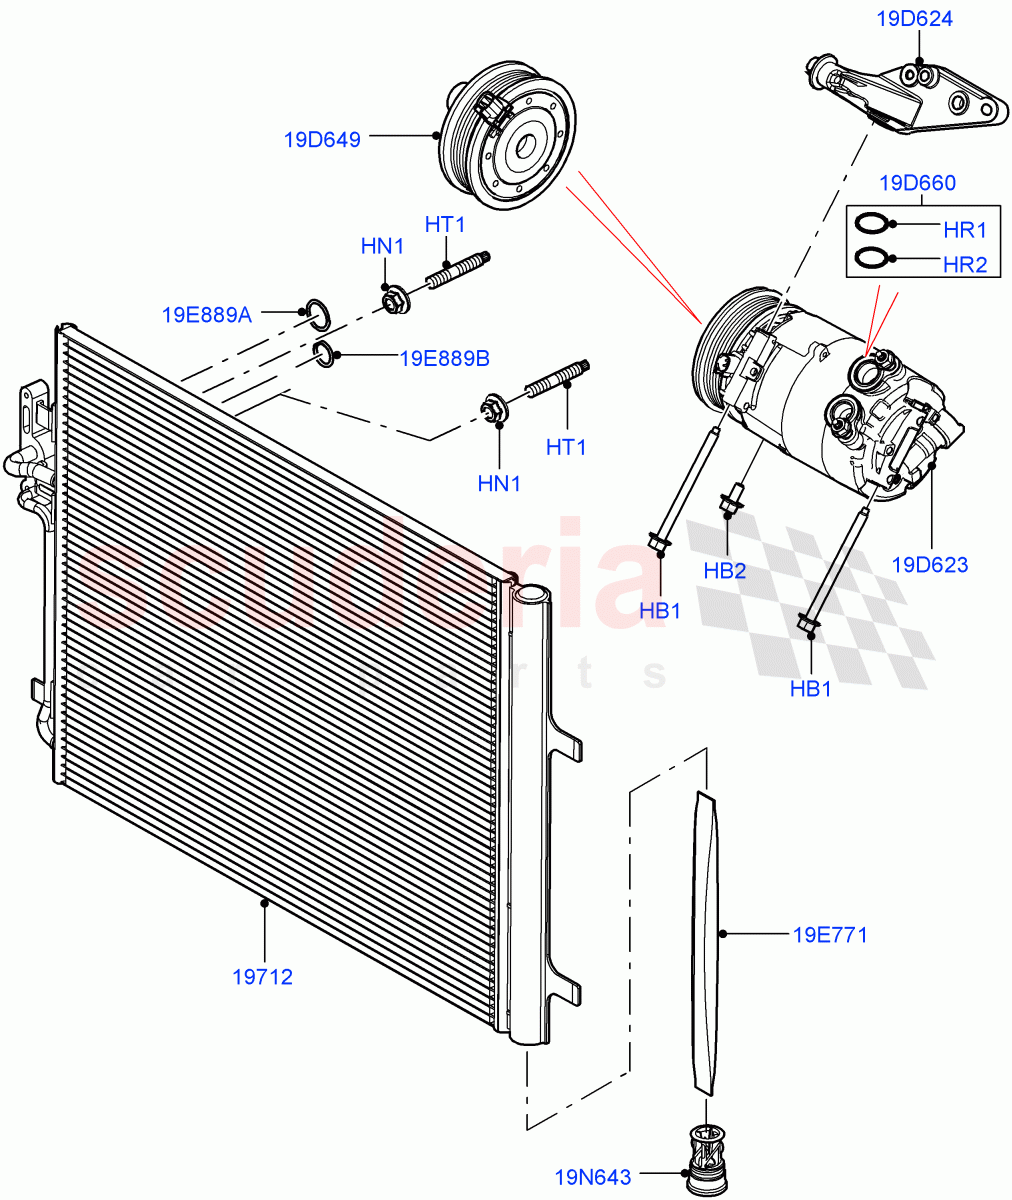 Air Conditioning Condensr/Compressr(2.0L 16V TIVCT T/C 240PS Petrol,Itatiaia (Brazil))((V)FROMGT000001) of Land Rover Land Rover Range Rover Evoque (2012-2018) [2.2 Single Turbo Diesel]